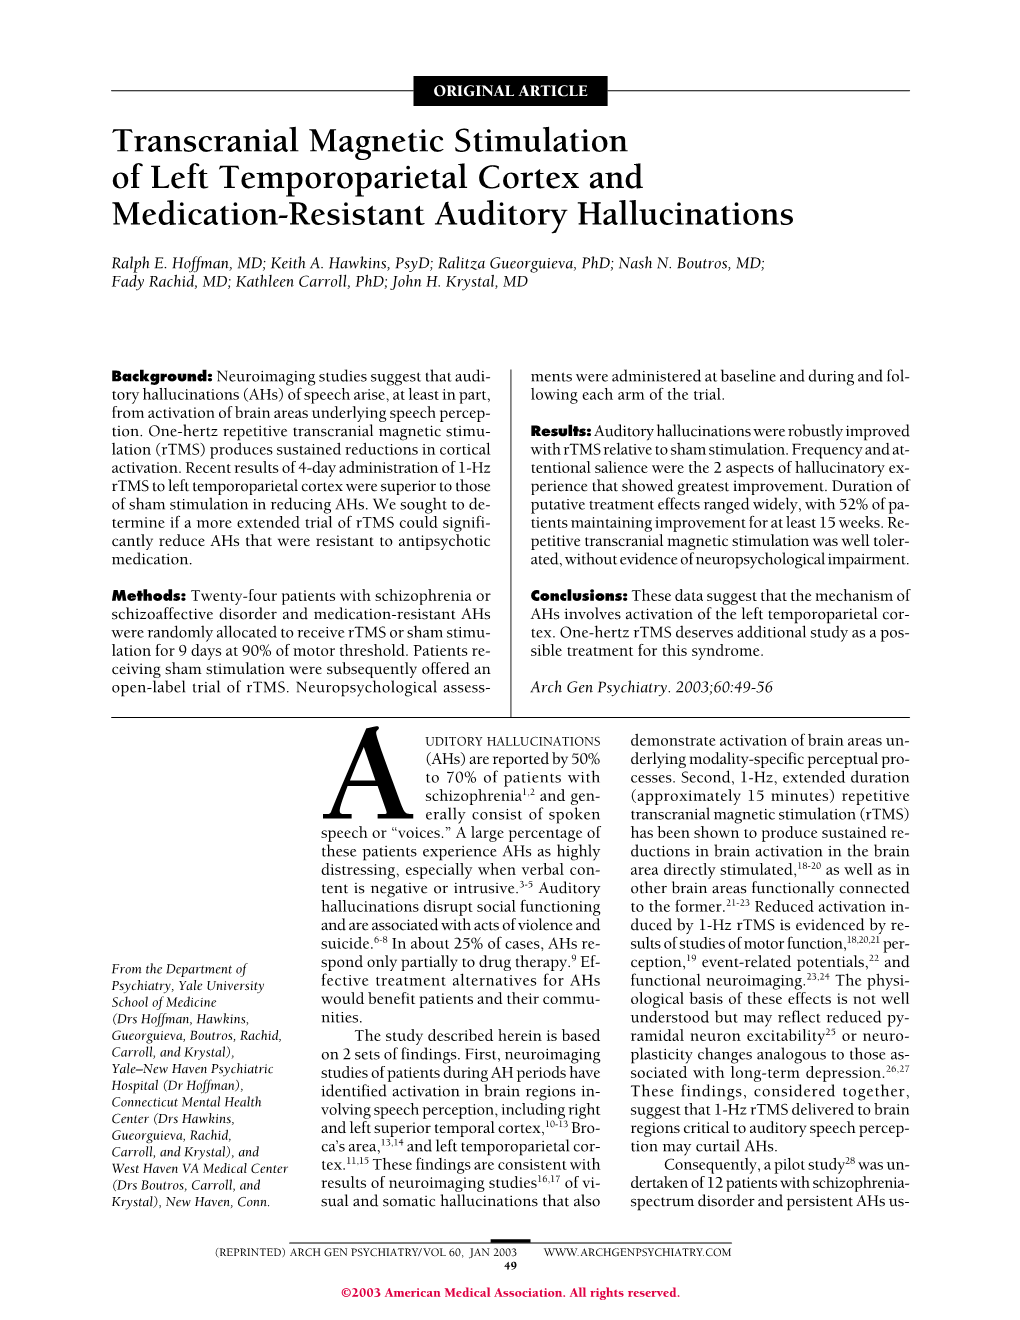 Transcranial Magnetic Stimulation of Left Temporoparietal Cortex and Medication-Resistant Auditory Hallucinations